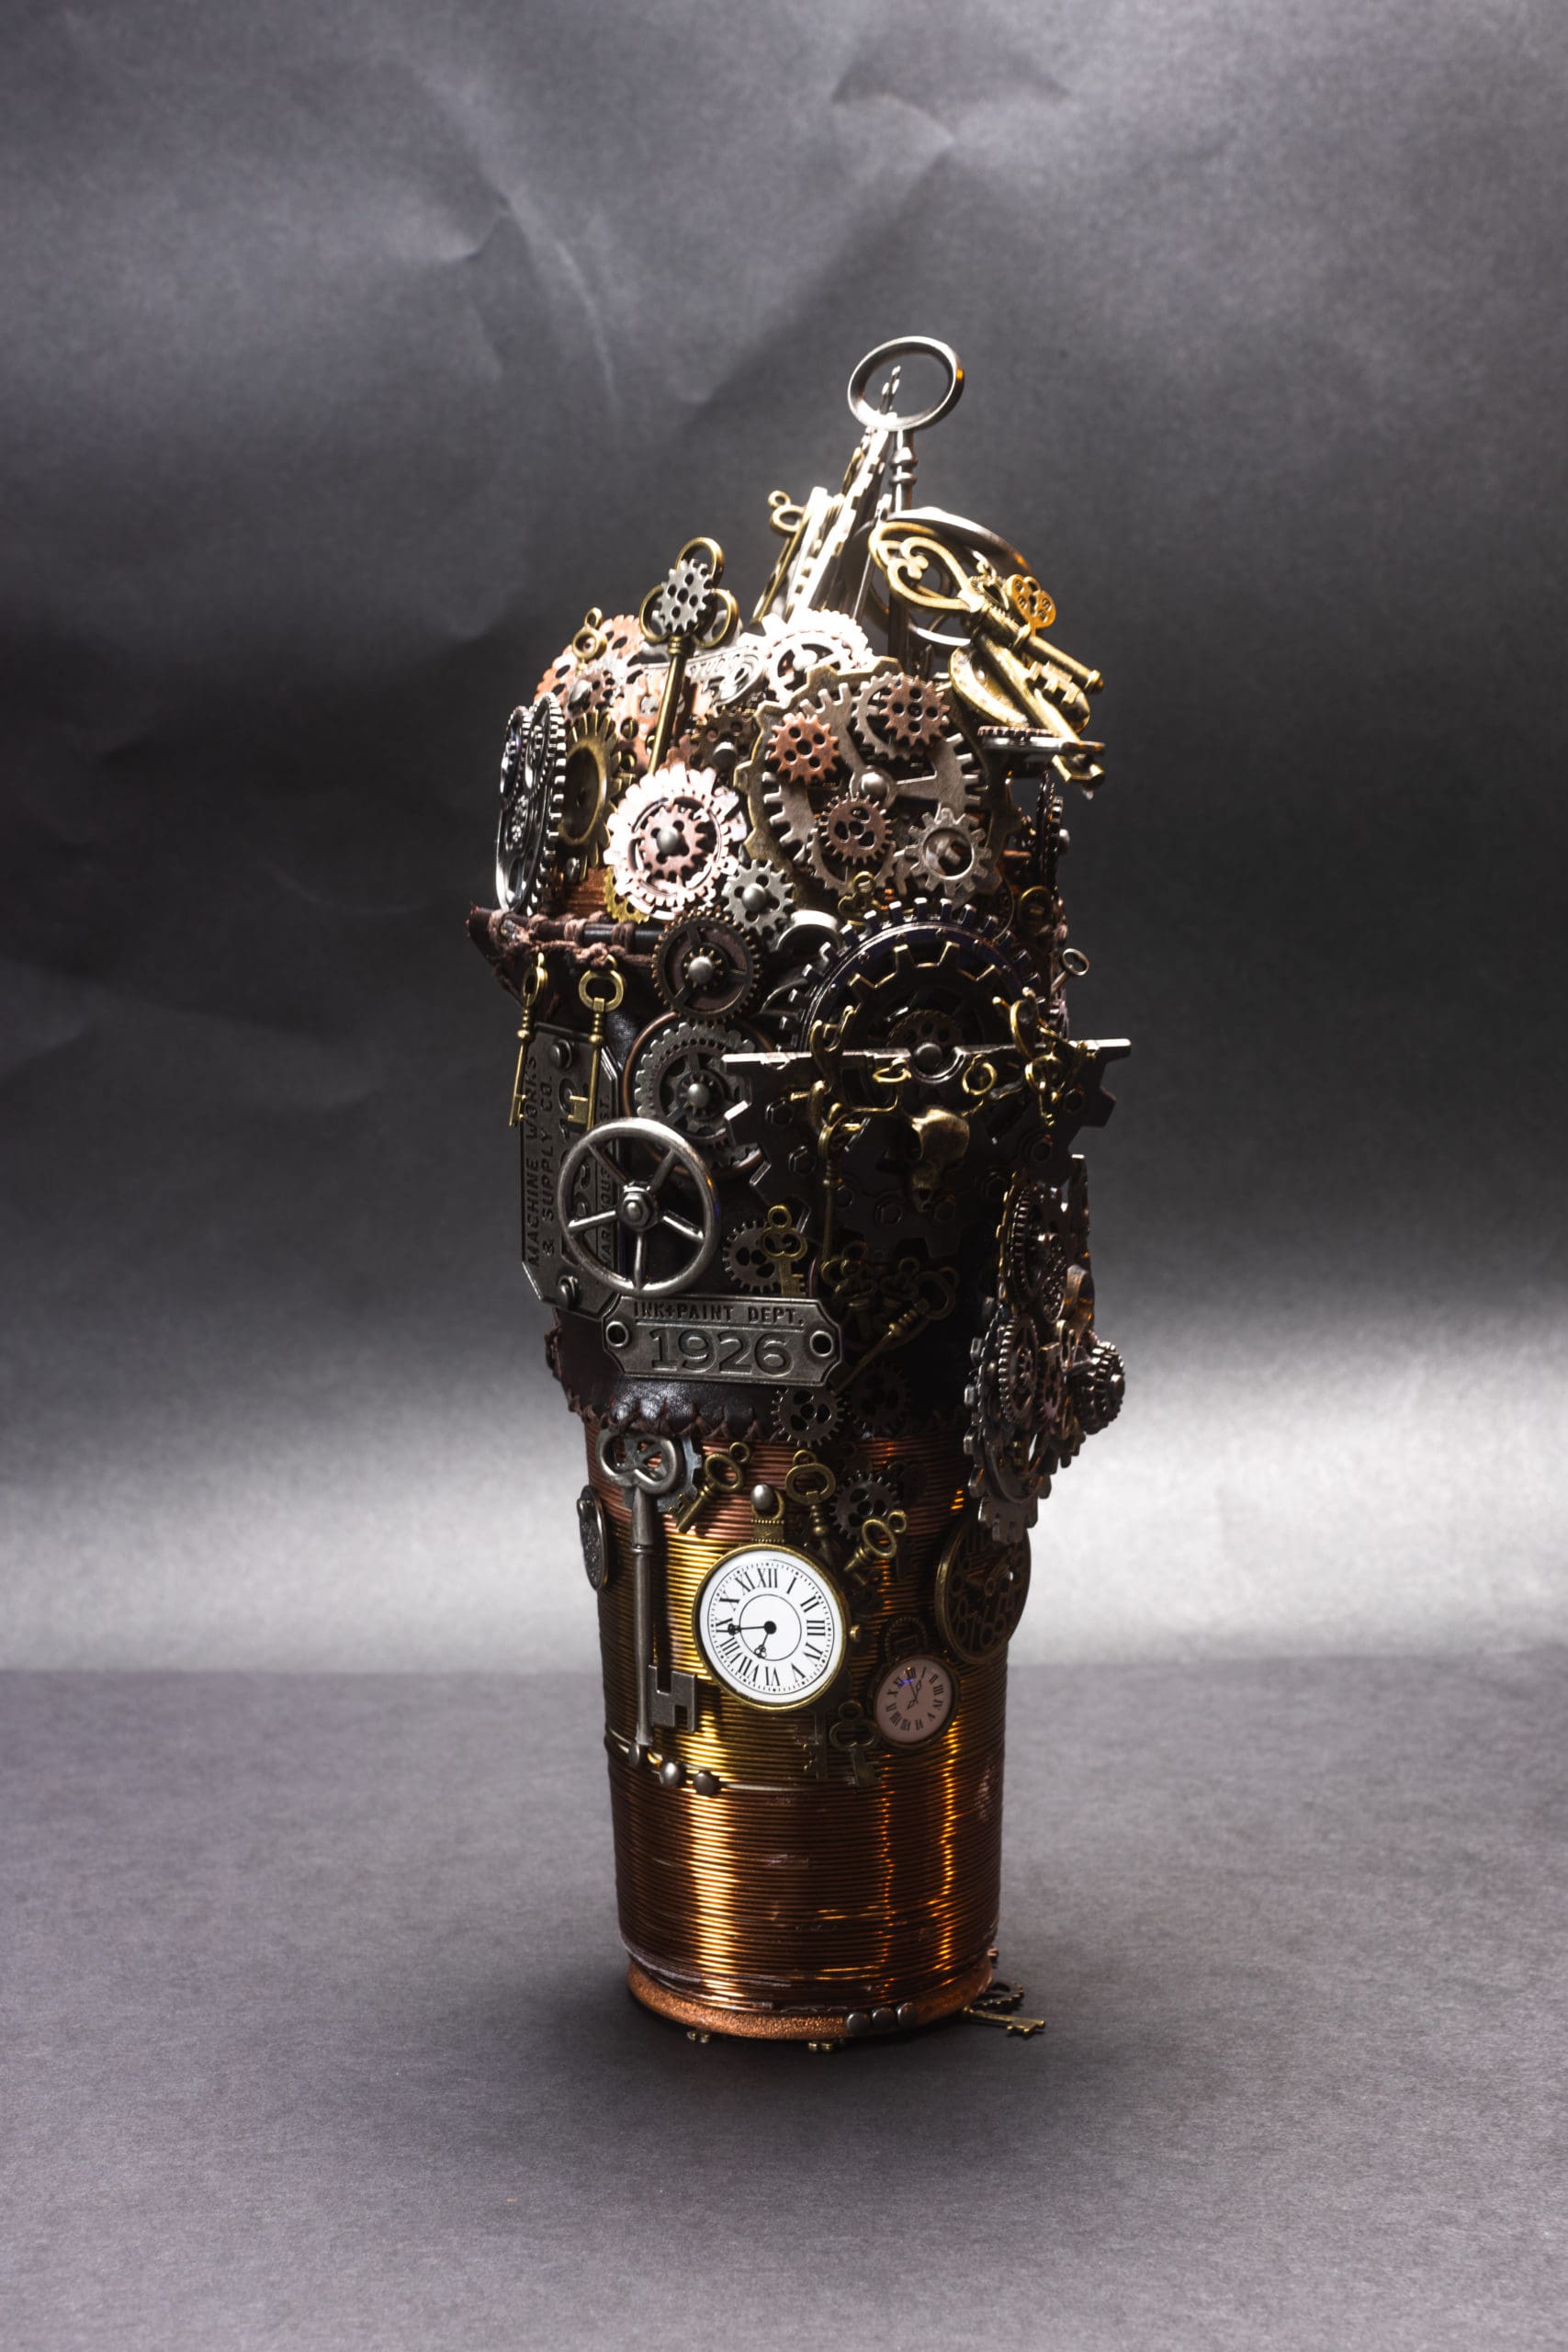 A "Steampunk" take on coffee to go. Cylinder wrapped in copper wire with stitched leather temperature guard. The top is covered in a foam of mechanical metal gears.